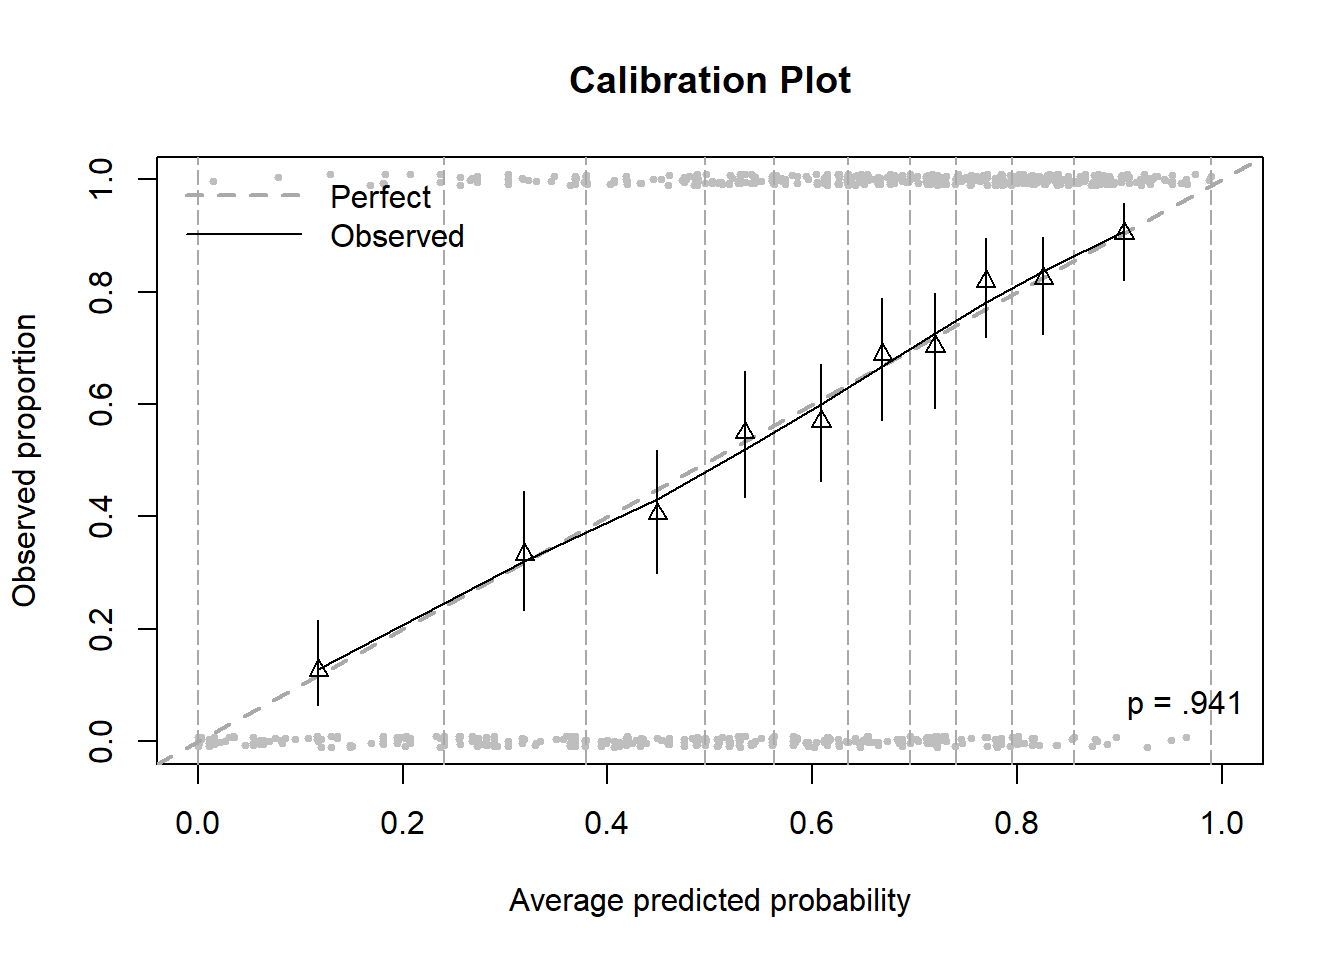 Calibration plot including bins and points